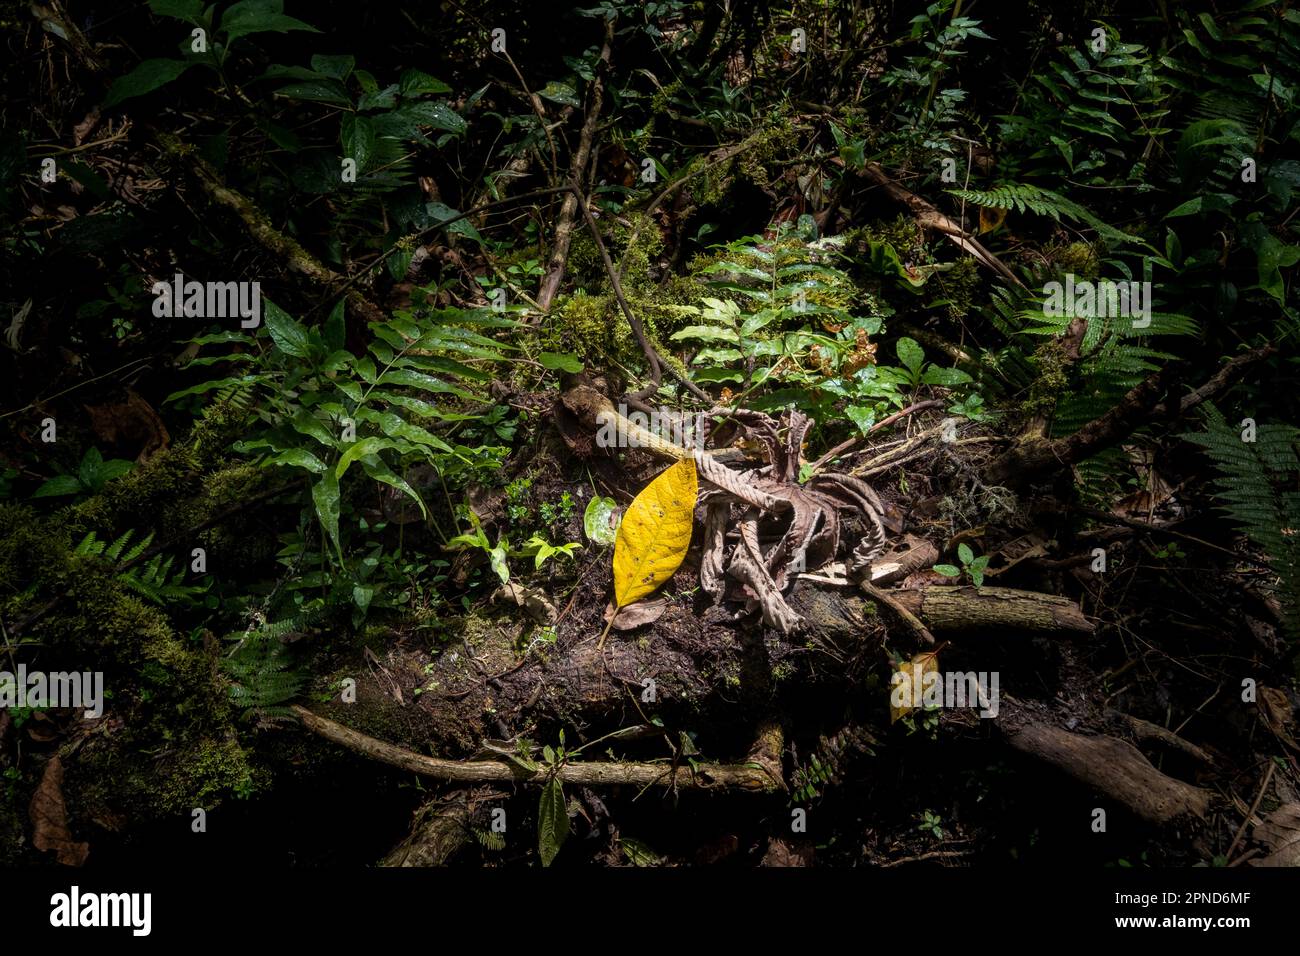 Yellow leaf on a tree trunk surrounded by green leaves and ferns, lit from above Stock Photo